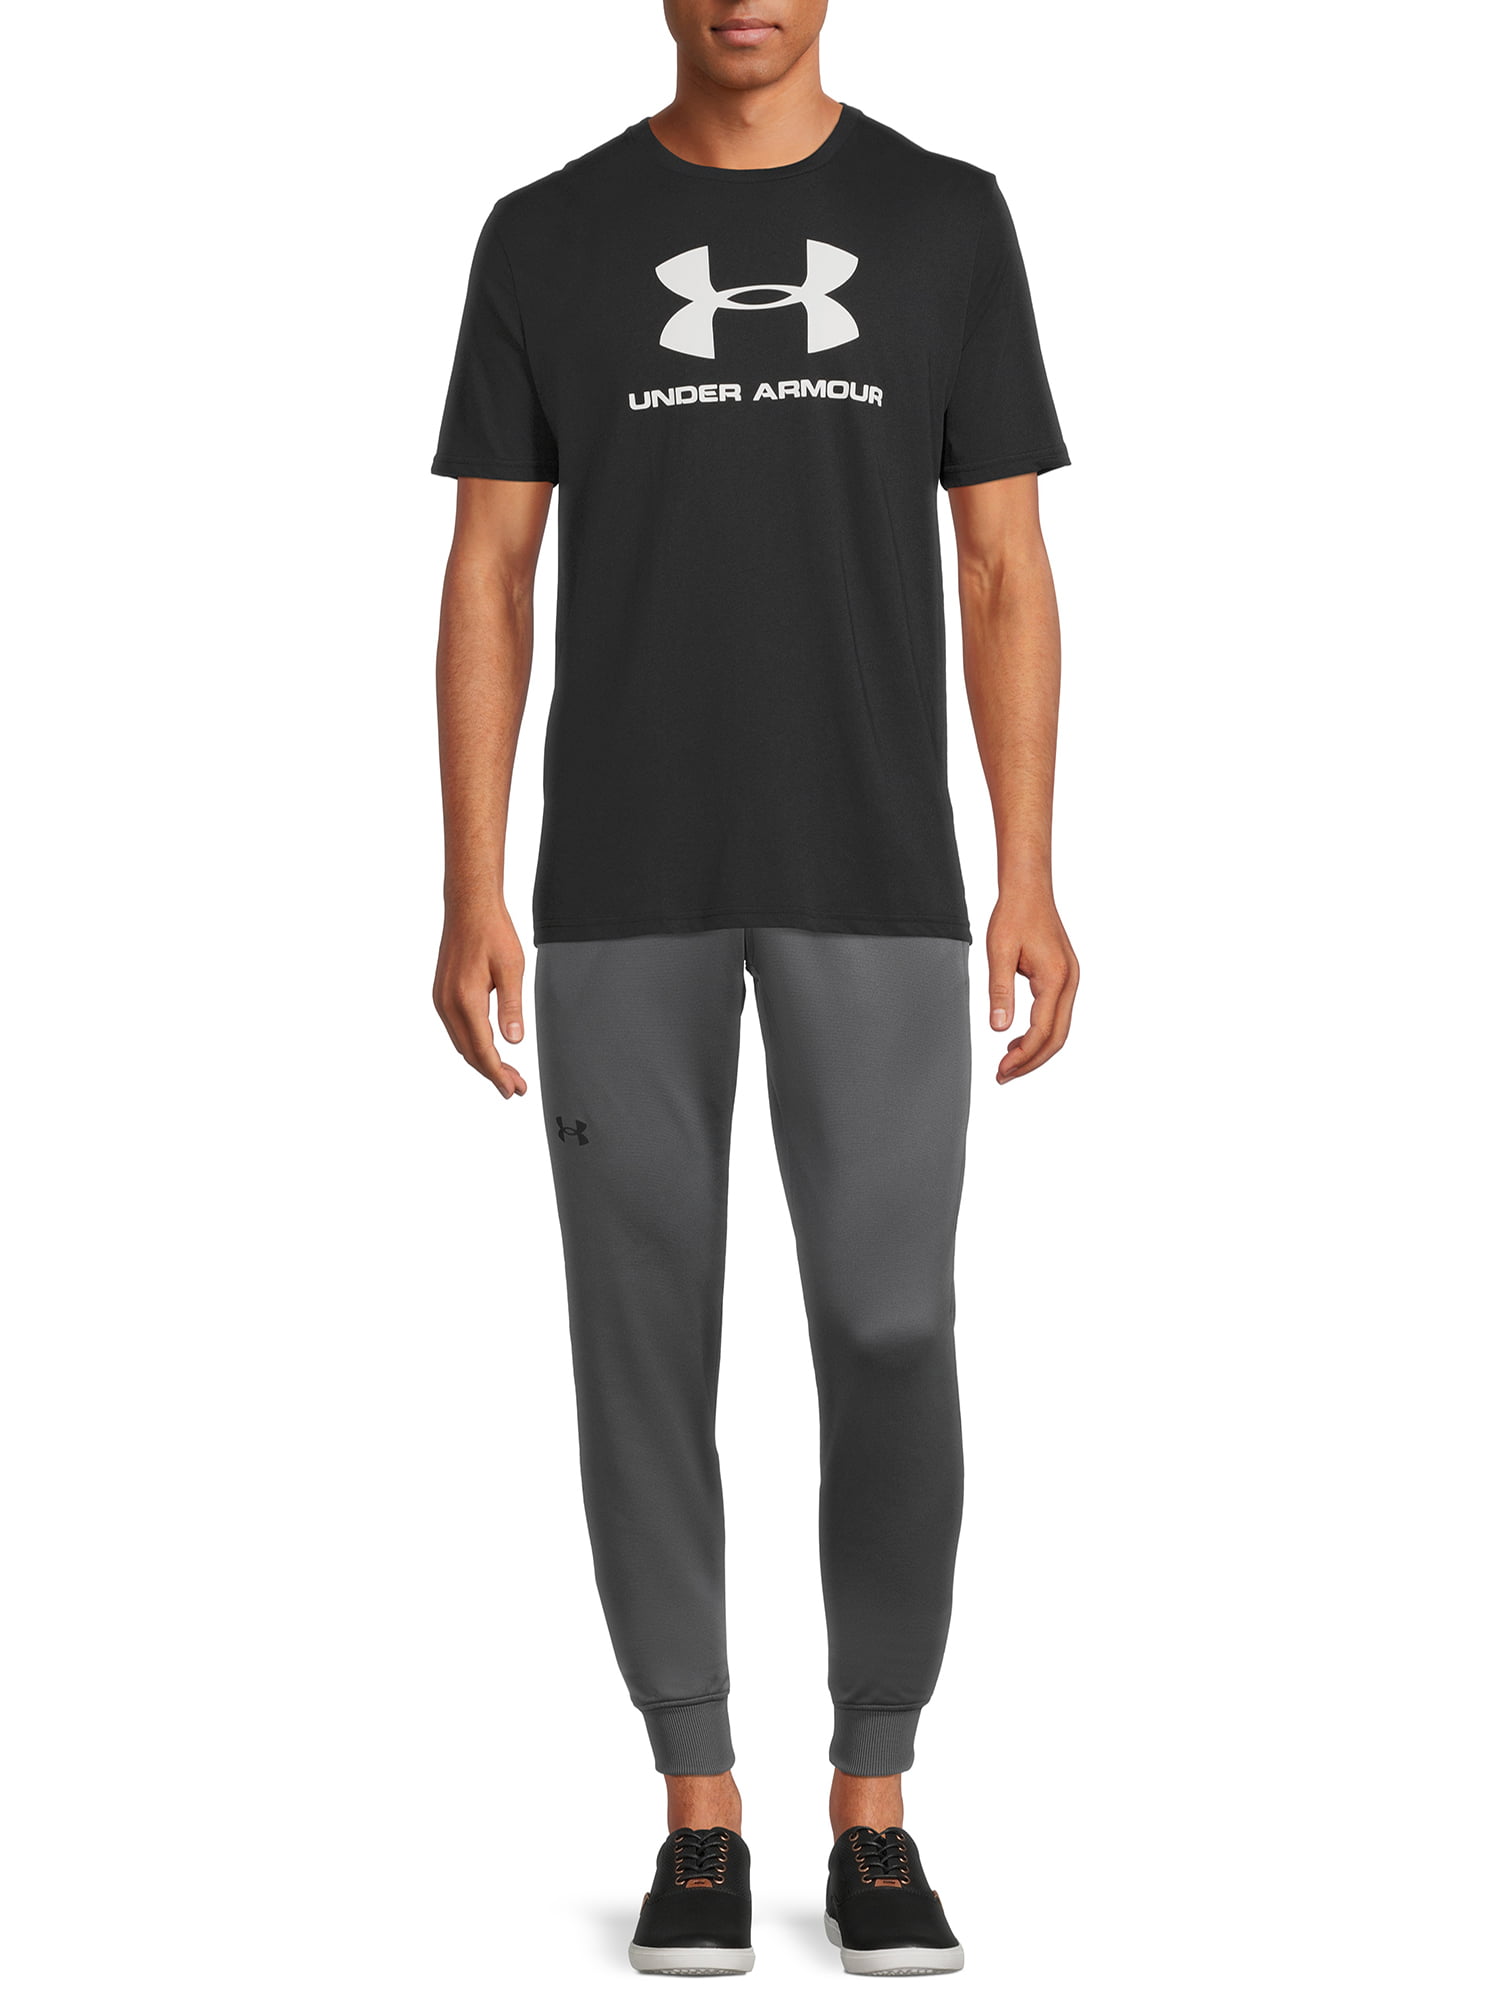 Under Armour Men\'s and Big Men\'s Sizes Short Sleeves, to with Sportstyle T-Shirt UA up 2XL Logo